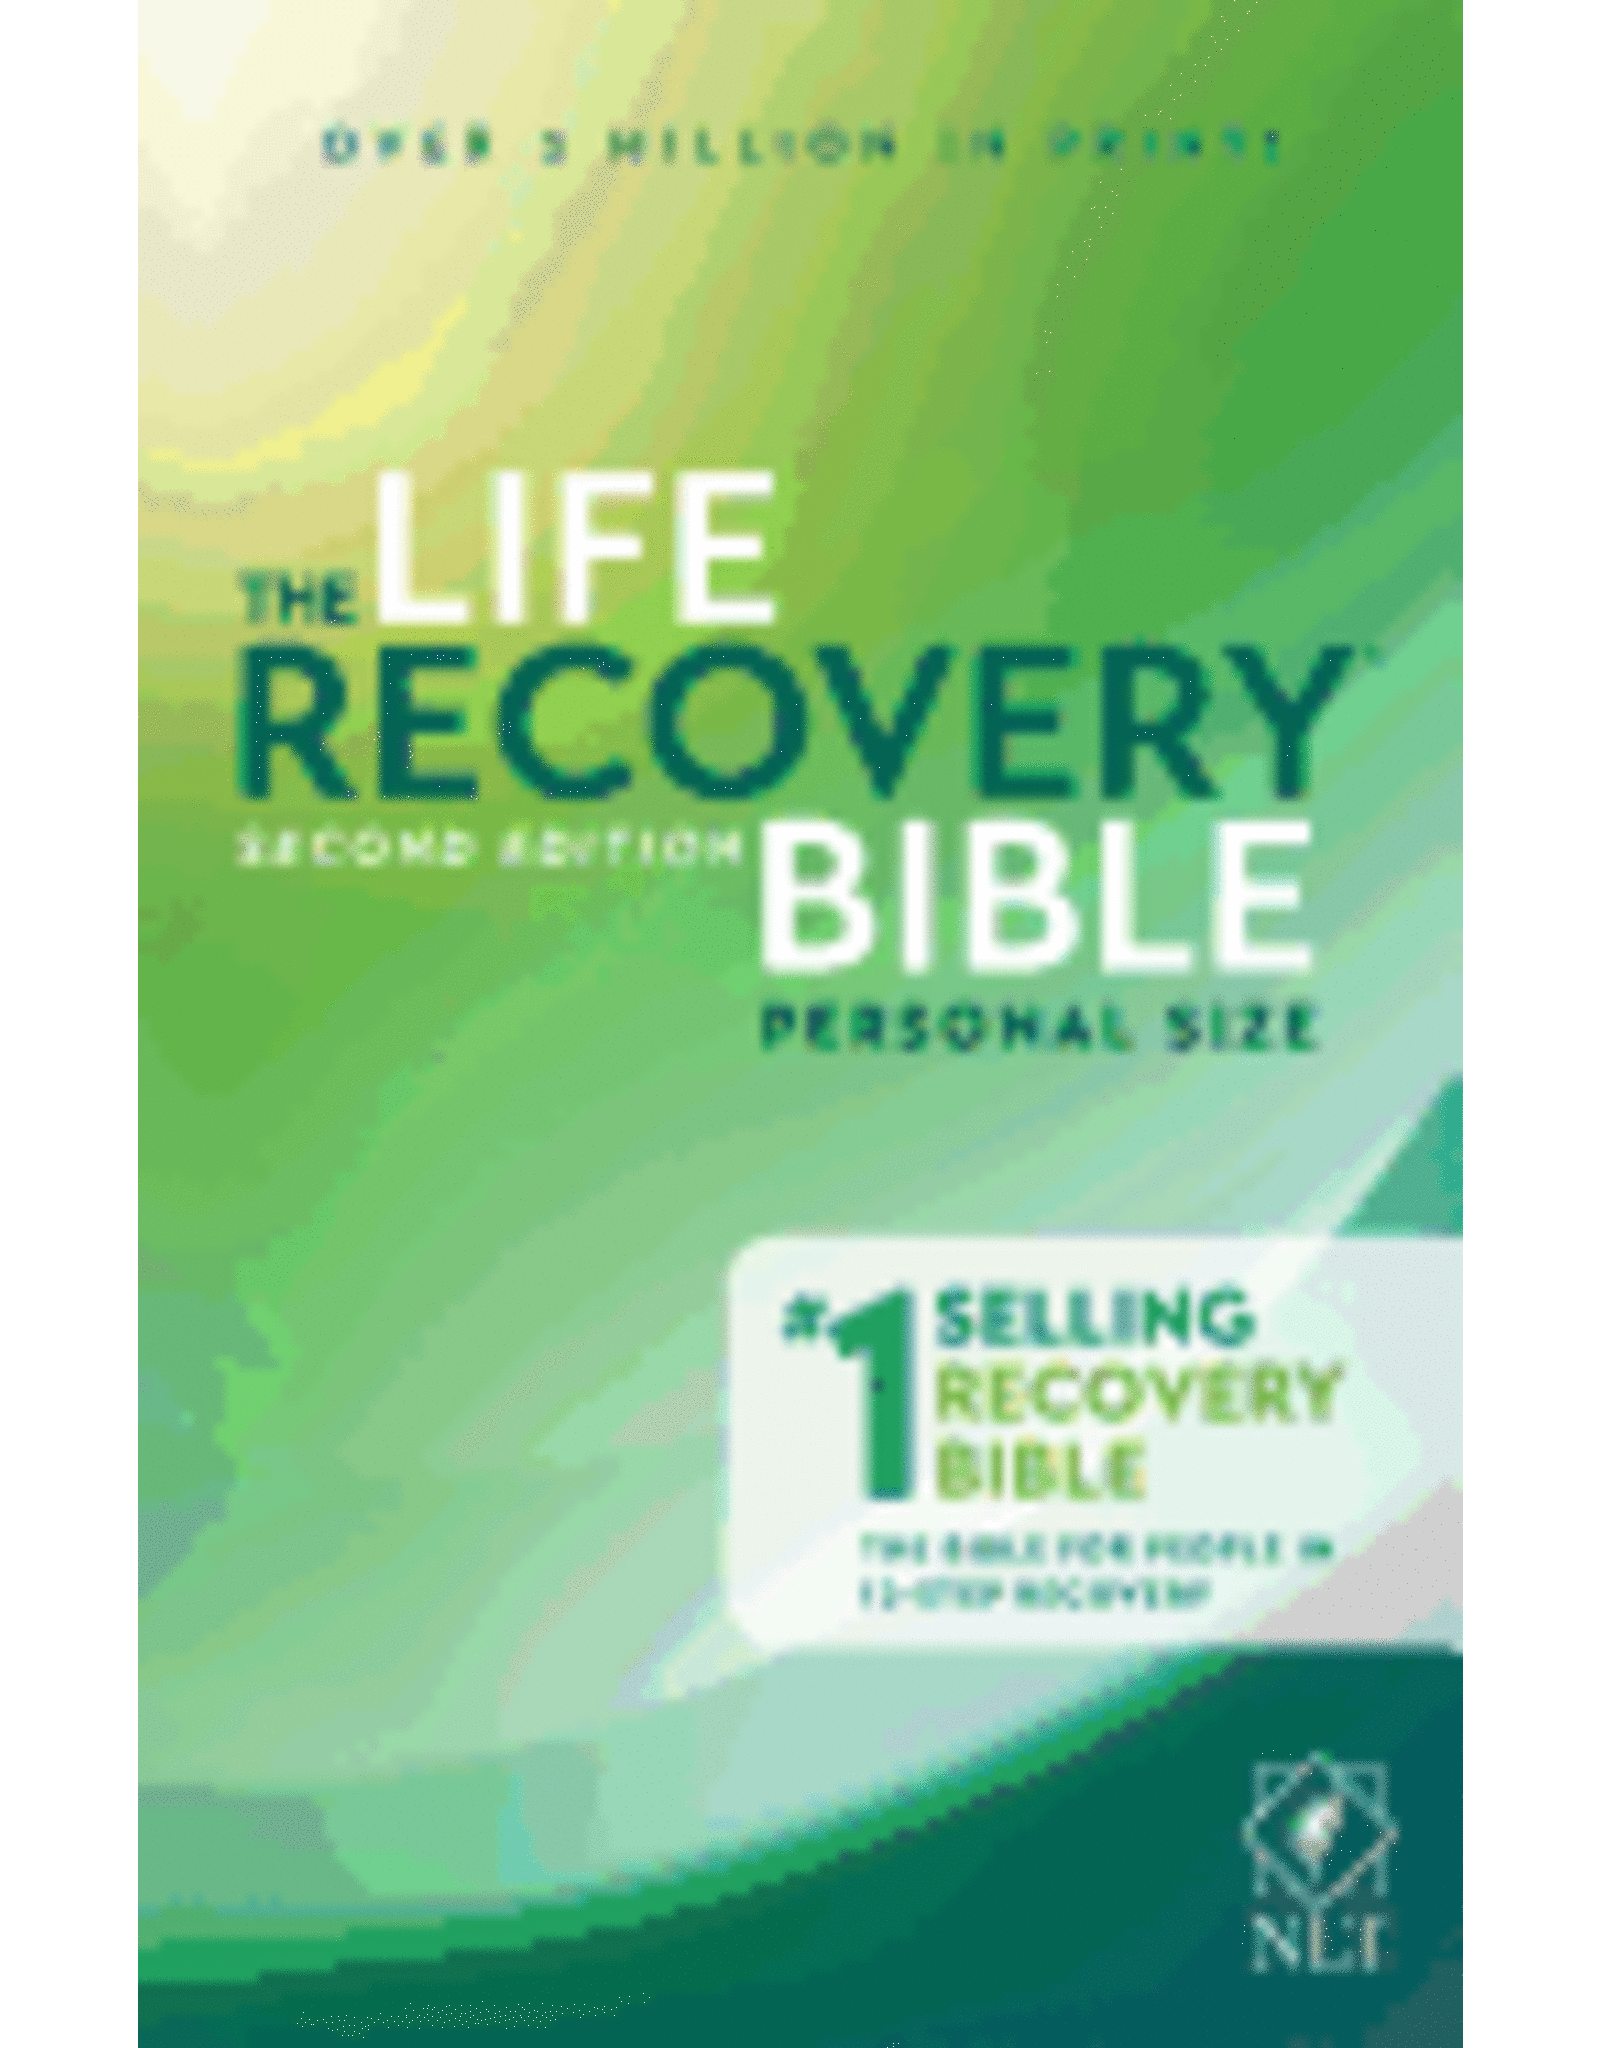 Tyndale NLT Life Recovery Bible (personal size)